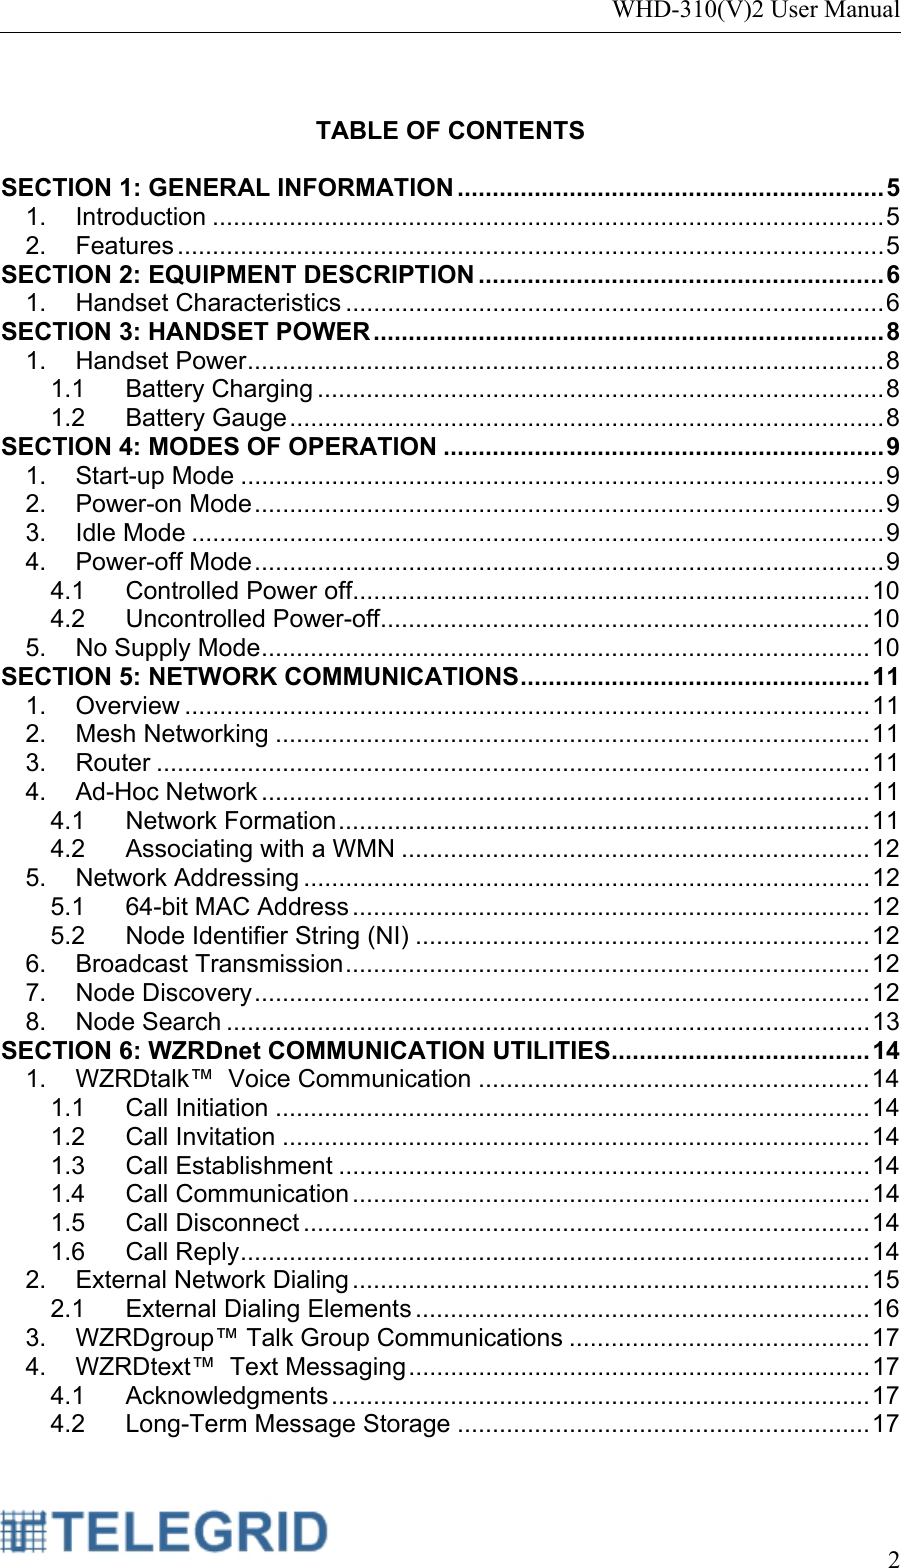 WHD-310(V)2 User Manual     2   TABLE OF CONTENTS  SECTION 1: GENERAL INFORMATION ............................................................. 5 1. Introduction ................................................................................................ 5 2. Features ..................................................................................................... 5 SECTION 2: EQUIPMENT DESCRIPTION .......................................................... 6 1. Handset Characteristics ............................................................................. 6 SECTION 3: HANDSET POWER ......................................................................... 8 1. Handset Power ........................................................................................... 8 1.1 Battery Charging ................................................................................. 8 1.2 Battery Gauge ..................................................................................... 8 SECTION 4: MODES OF OPERATION ............................................................... 9 1. Start-up Mode ............................................................................................ 9 2. Power-on Mode .......................................................................................... 9 3. Idle Mode ................................................................................................... 9 4. Power-off Mode .......................................................................................... 9 4.1 Controlled Power off.......................................................................... 10 4.2 Uncontrolled Power-off ...................................................................... 10 5. No Supply Mode ....................................................................................... 10 SECTION 5: NETWORK COMMUNICATIONS ..................................................  11 1. Overview .................................................................................................. 11 2. Mesh Networking ..................................................................................... 11 3. Router ...................................................................................................... 11 4. Ad-Hoc Network ....................................................................................... 11 4.1 Network Formation ............................................................................ 11 4.2 Associating with a WMN ................................................................... 12 5. Network Addressing ................................................................................. 12 5.1 64-bit MAC Address .......................................................................... 12 5.2 Node Identifier String (NI) ................................................................. 12 6. Broadcast Transmission ........................................................................... 12 7. Node Discovery ........................................................................................ 12 8. Node Search ............................................................................................ 13 SECTION 6: WZRDnet COMMUNICATION UTILITIES ..................................... 14 1. WZRDtalk™  Voice Communication ........................................................ 14 1.1 Call Initiation ..................................................................................... 14 1.2 Call Invitation .................................................................................... 14 1.3 Call Establishment ............................................................................ 14 1.4 Call Communication .......................................................................... 14 1.5 Call Disconnect ................................................................................. 14 1.6 Call Reply .......................................................................................... 14 2. External Network Dialing .......................................................................... 15 2.1 External Dialing Elements ................................................................. 16 3. WZRDgroup™ Talk Group Communications ........................................... 17 4. WZRDtext™  Text Messaging .................................................................. 17 4.1 Acknowledgments ............................................................................. 17 4.2 Long-Term Message Storage ........................................................... 17 